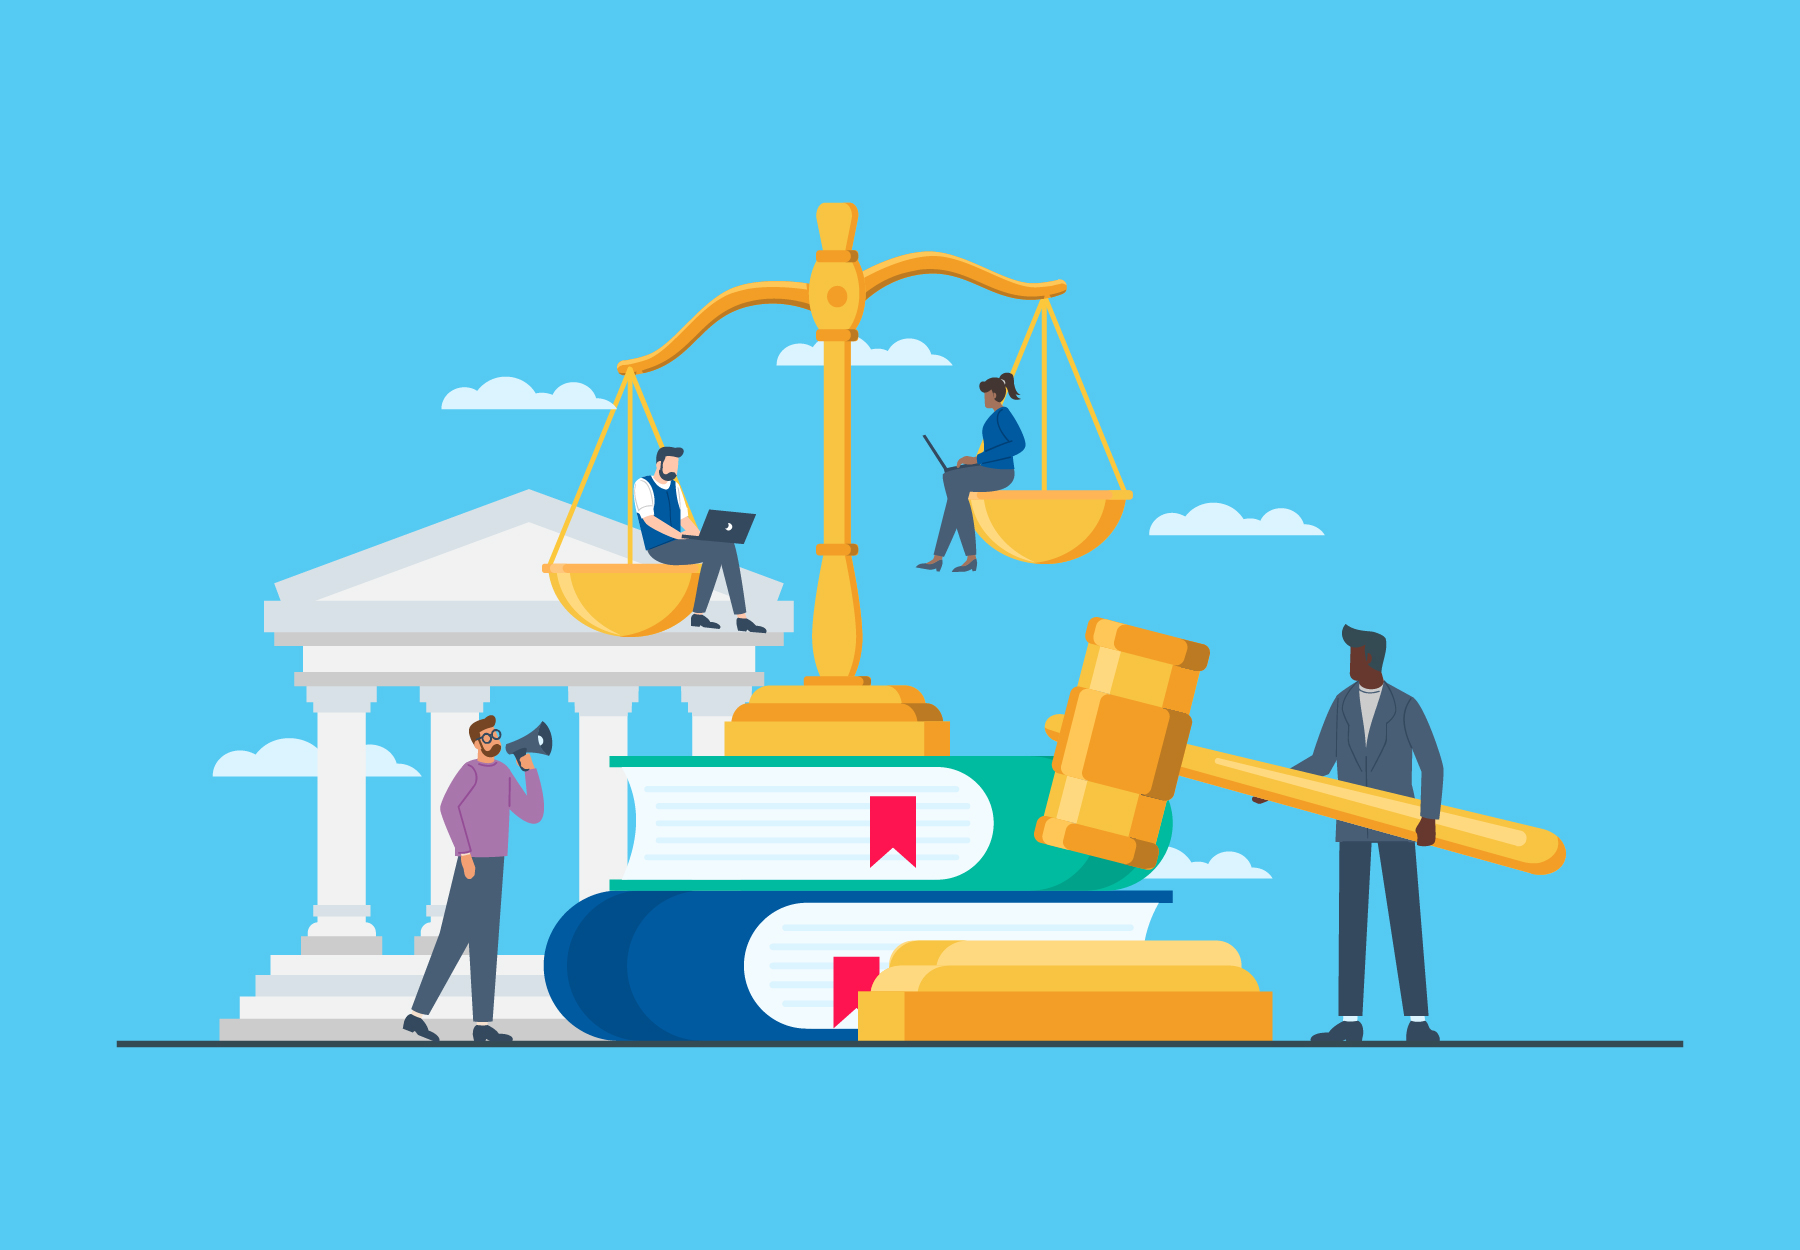 An image of various people around a stack of books, legal scales and legislative building. One person is holding a gavel. New legislation concept.